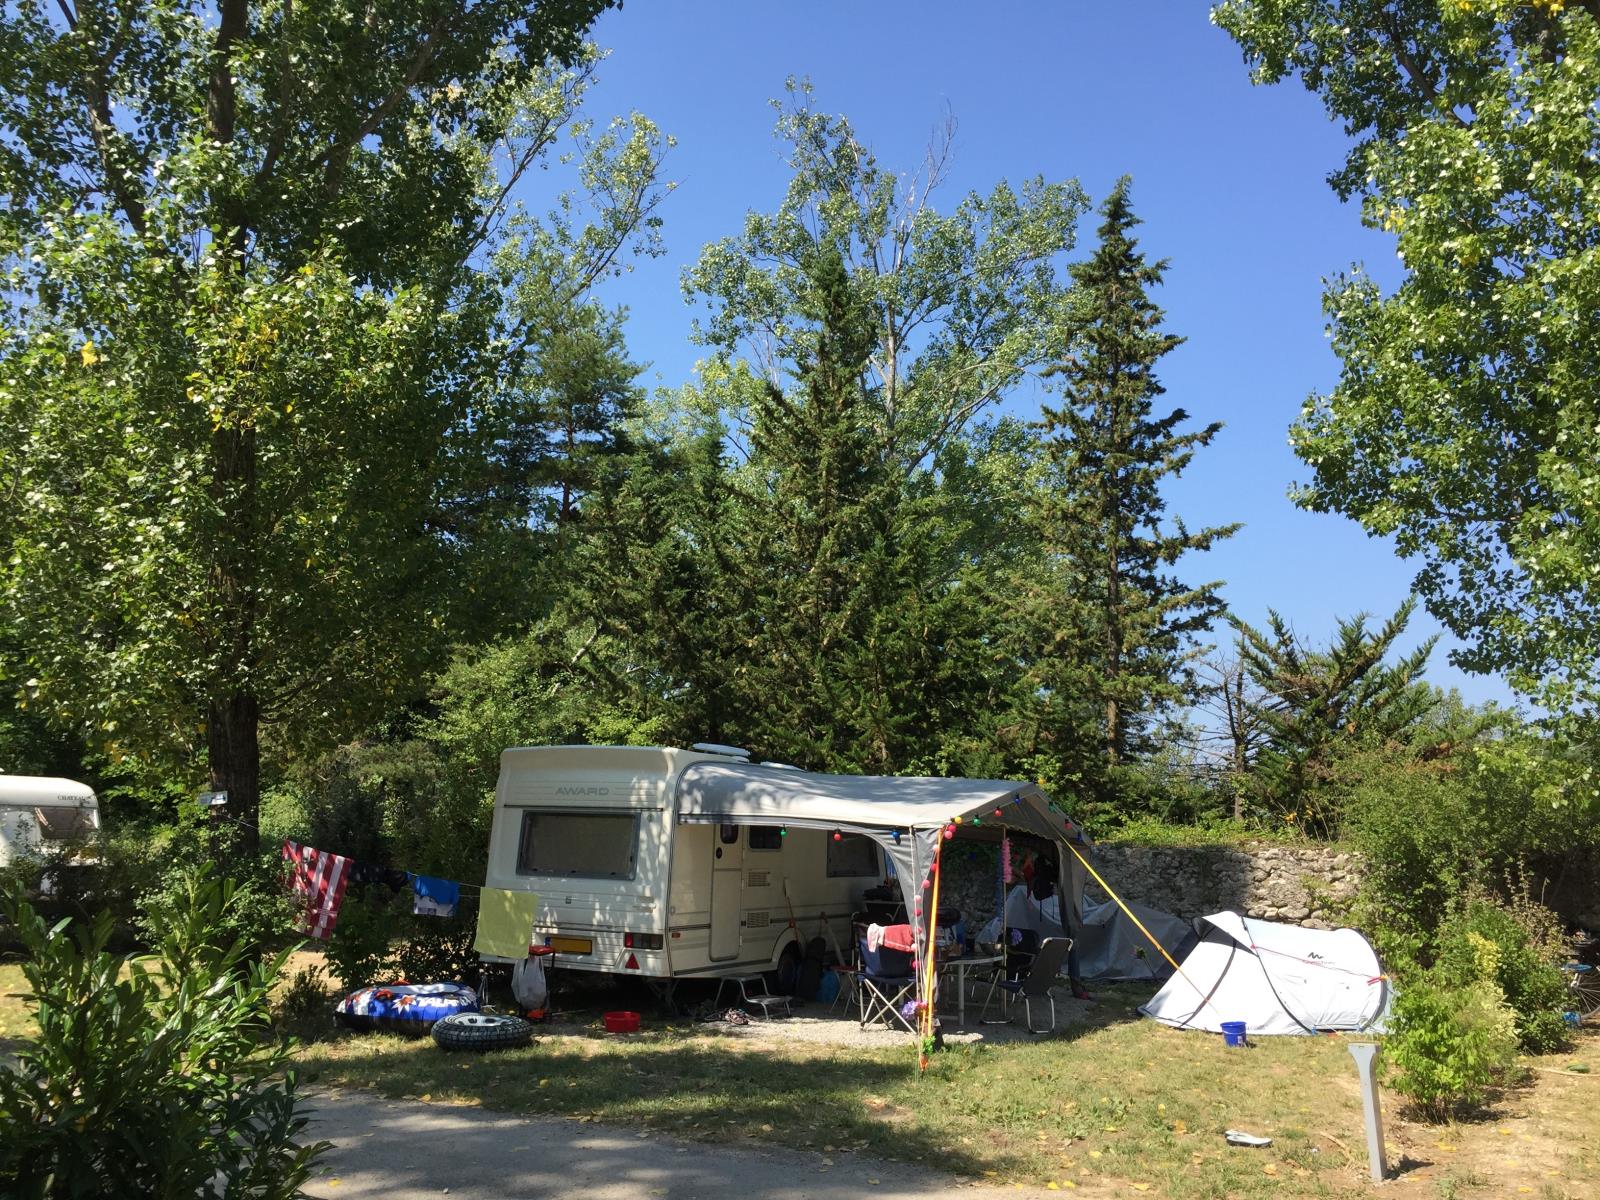 Pitch - Camping Pitch With Electricity Under The Poplars (1 Car + 1 Tent Or 1 Caravan) - Camping Les Chapelains